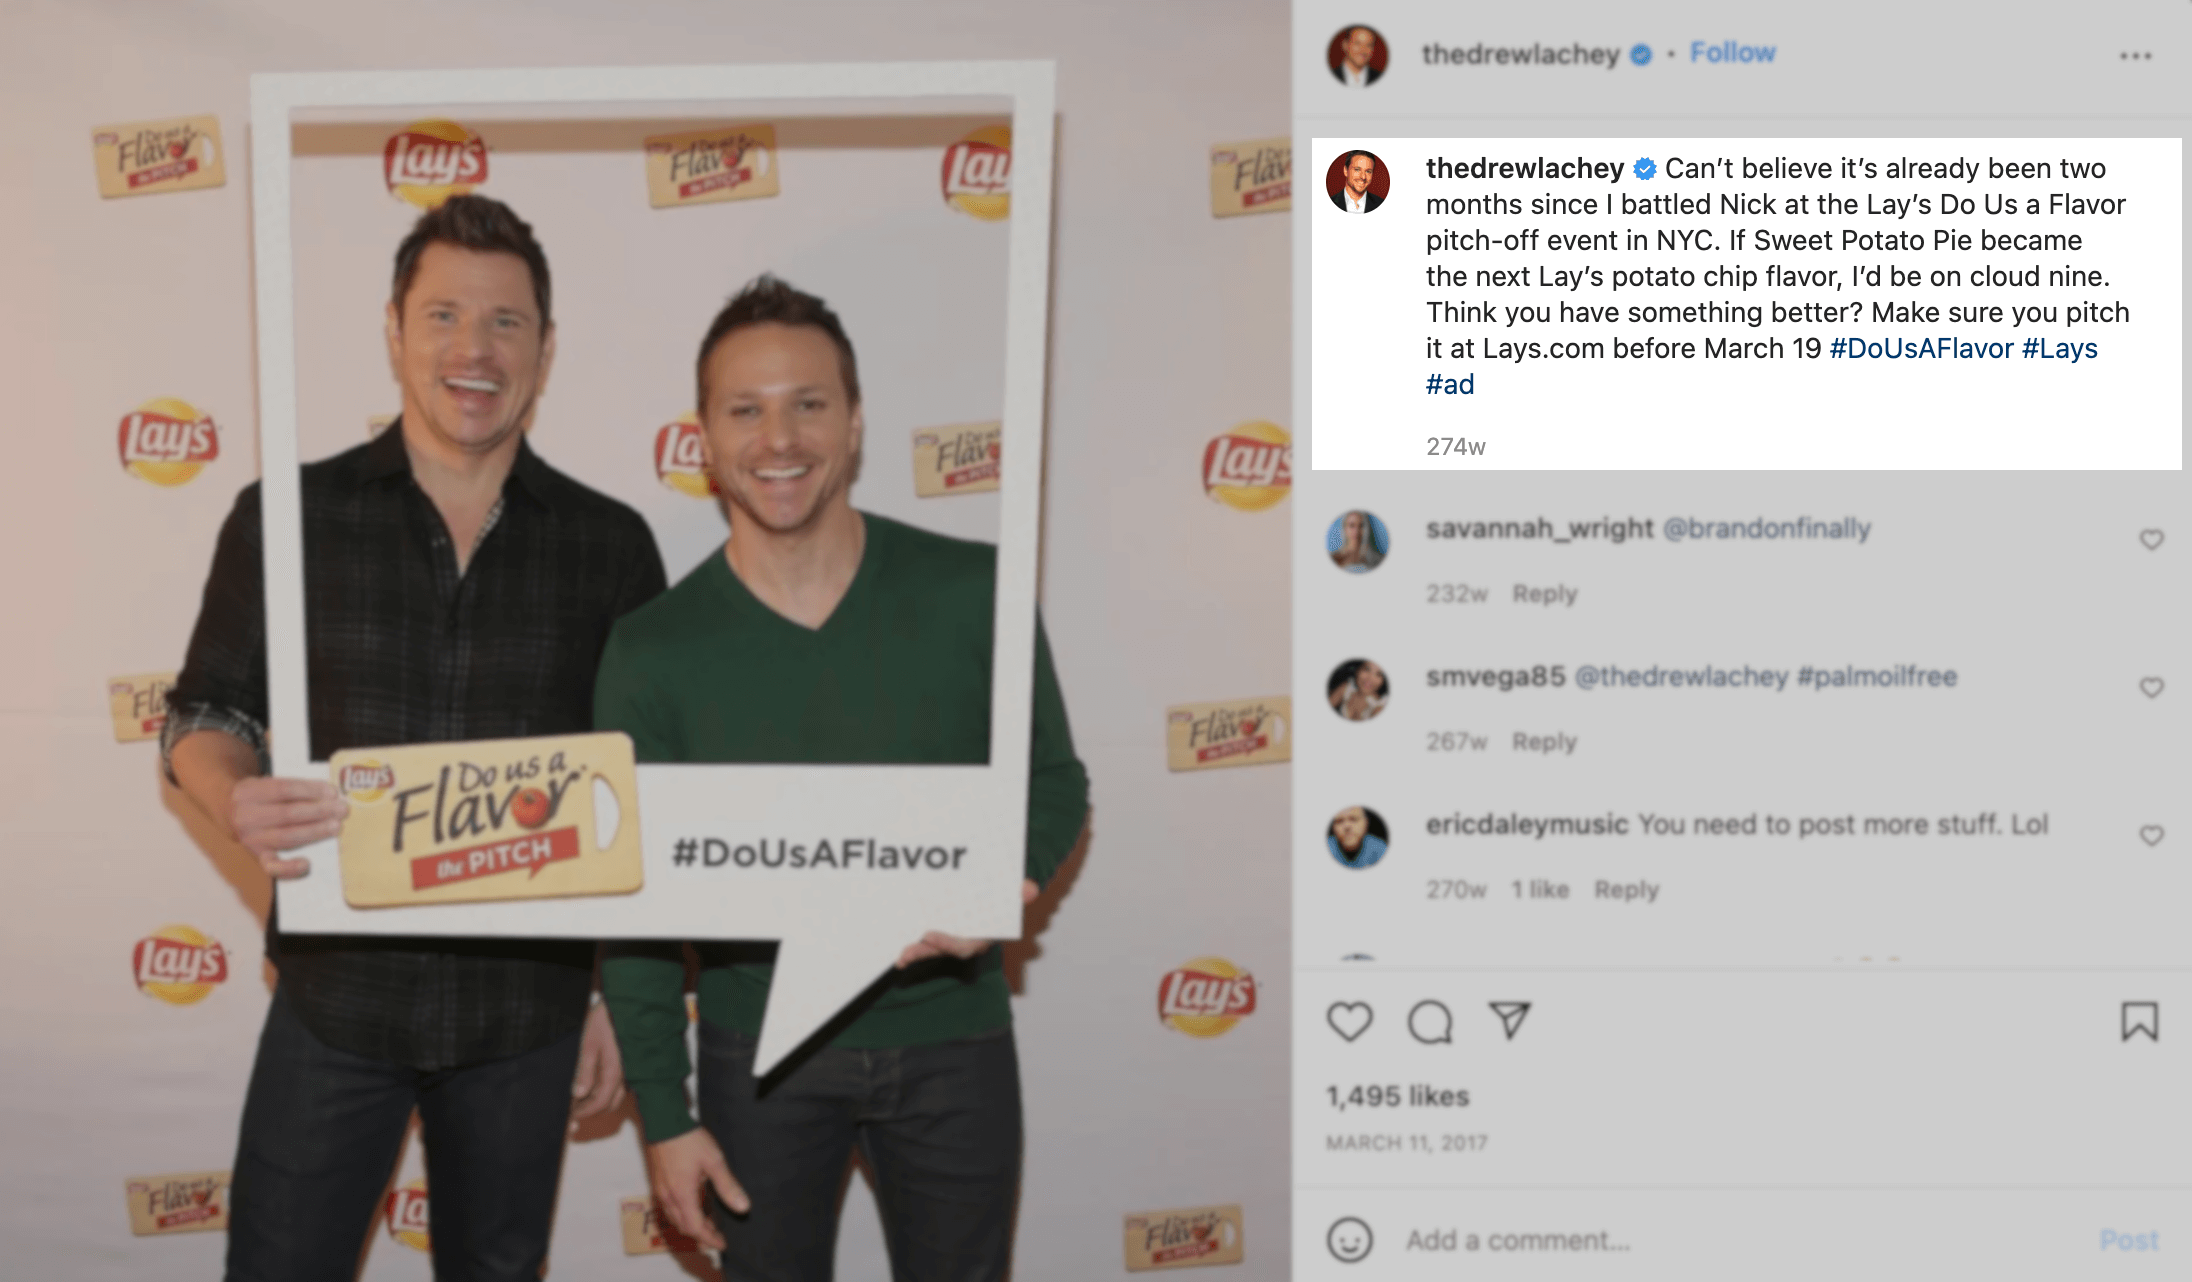 Screenshot of #DoUsAFlavor” hashtag by Lays